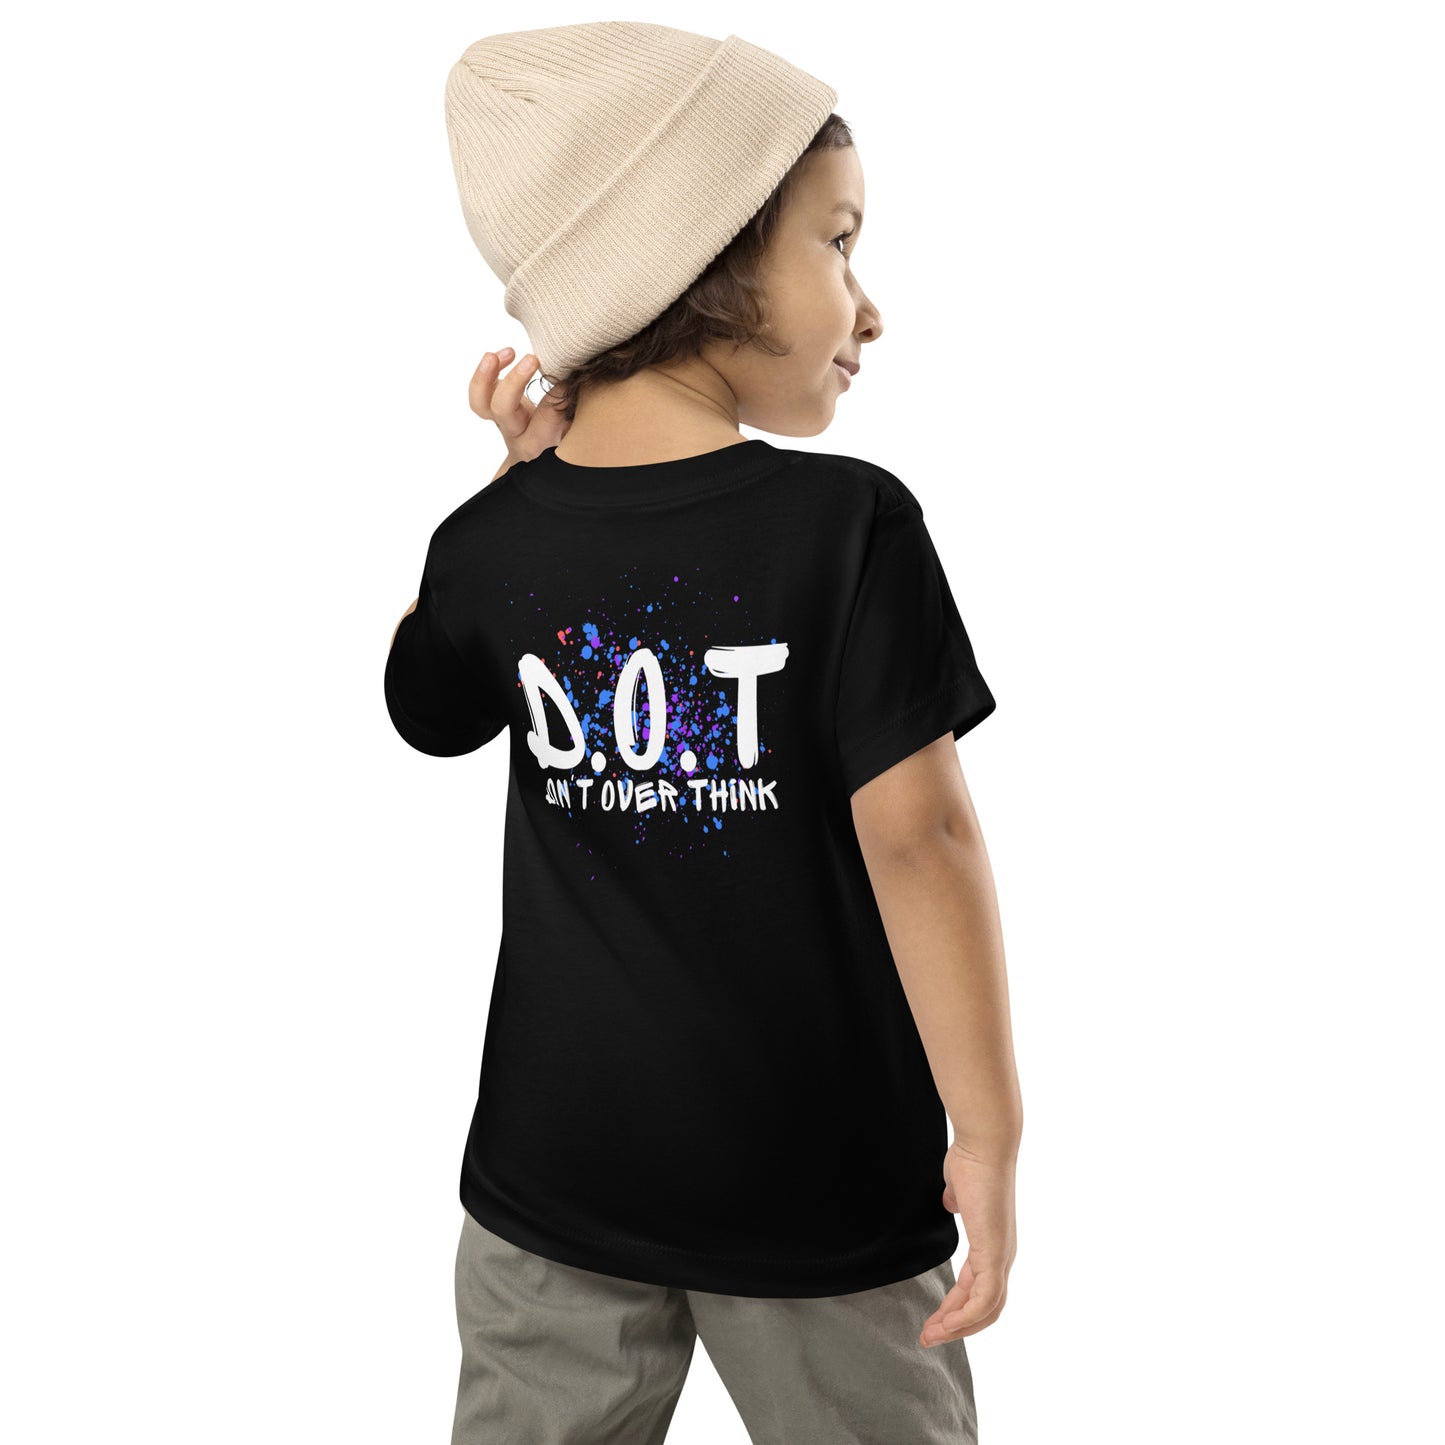 Don't OverThink (D.O.T) Toddler Short Sleeve Tee